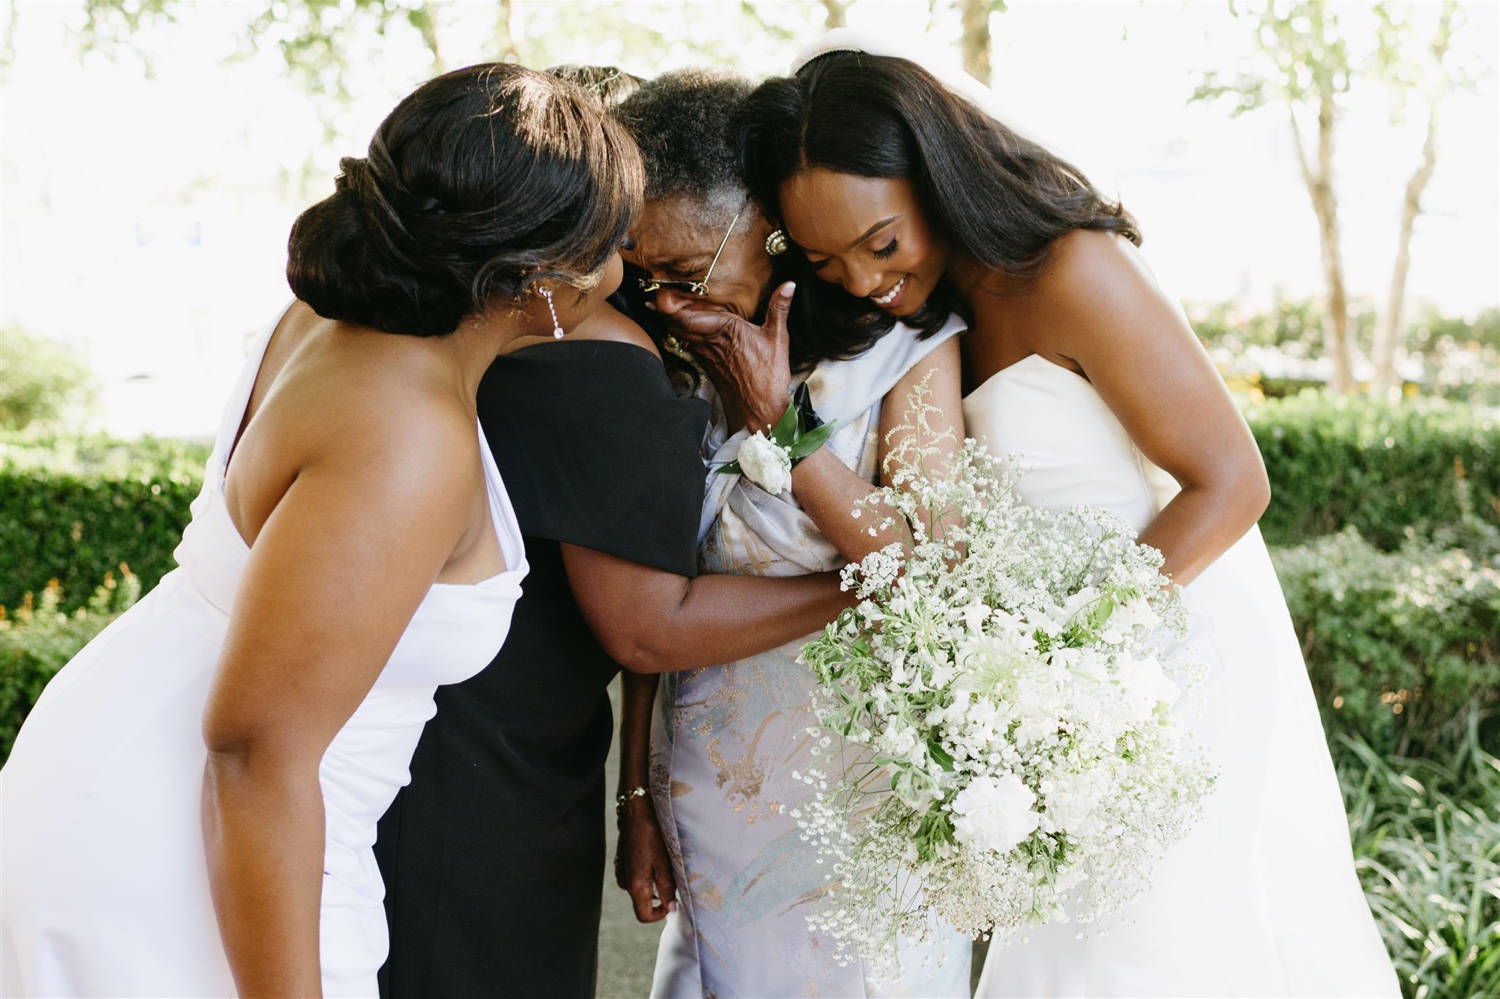 bride mother of the bride grandmother of the bride sister of the bride 3 generation family hugging grandmother holding back tears